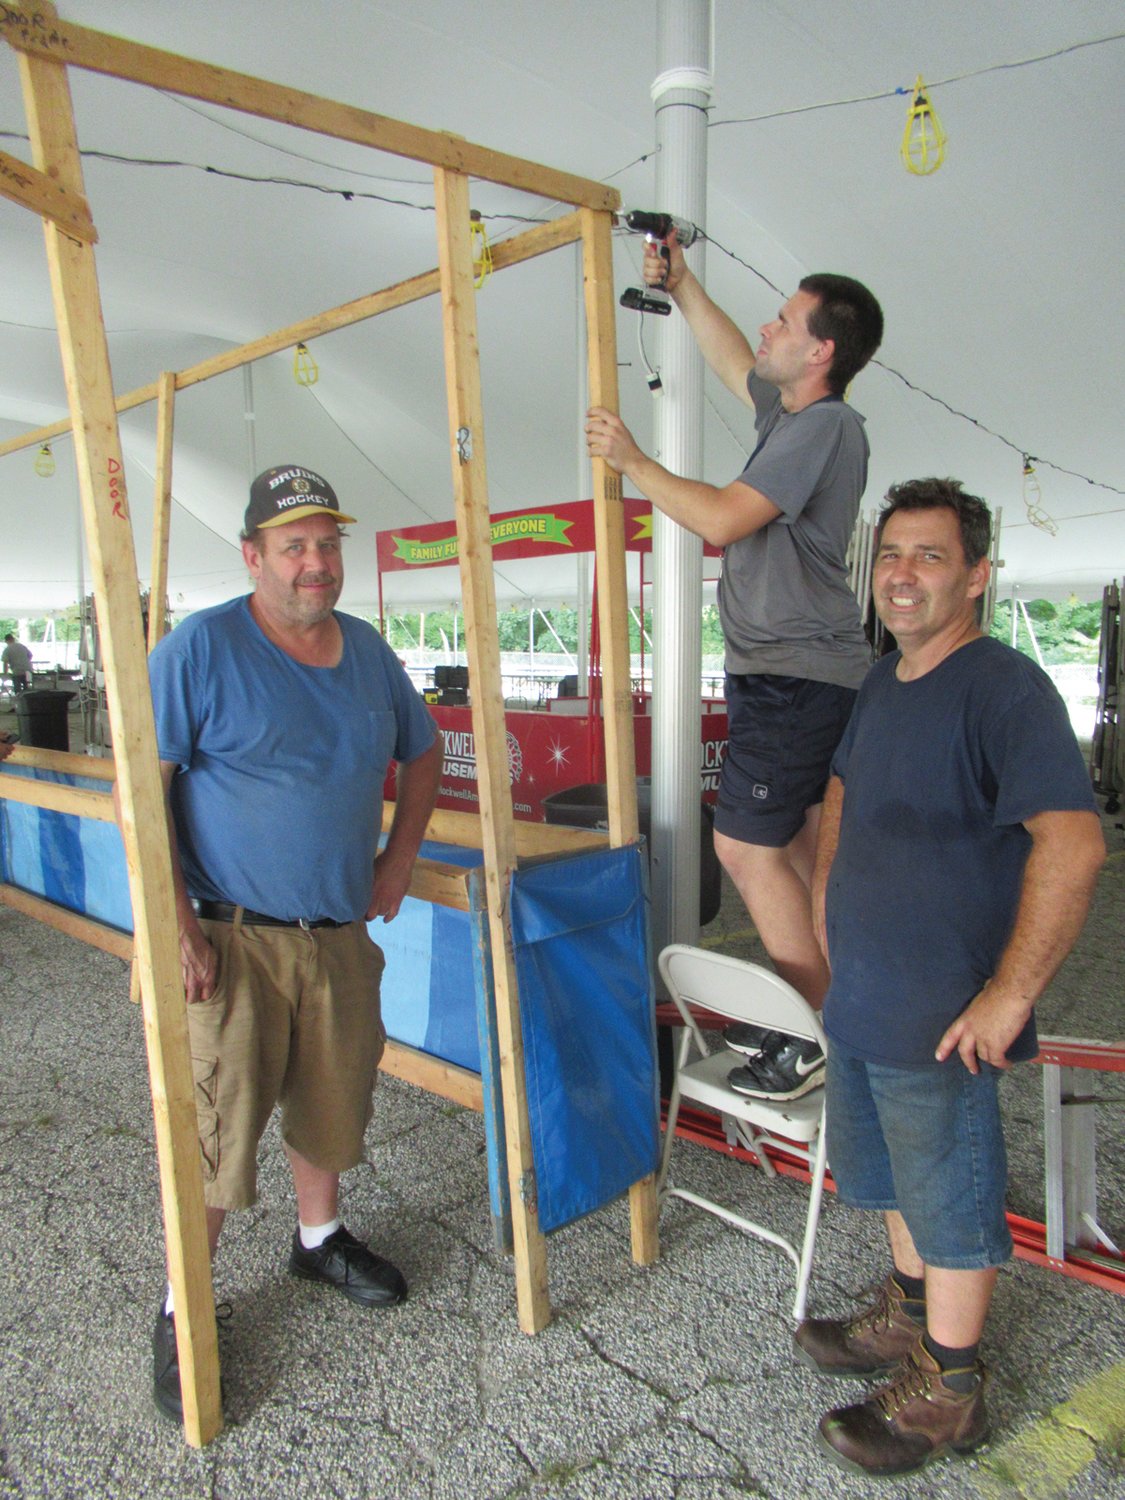 STRONG SUPPORT: Jeremy Bousquet nails a portion of the Women’s Guild Straw Game both as Bruce Baker and David Charron make sure the ladder doesn’t move Monday night while setting up under the “Big Top” for this weekend’s Saint Rocco’s Feast and Festival.